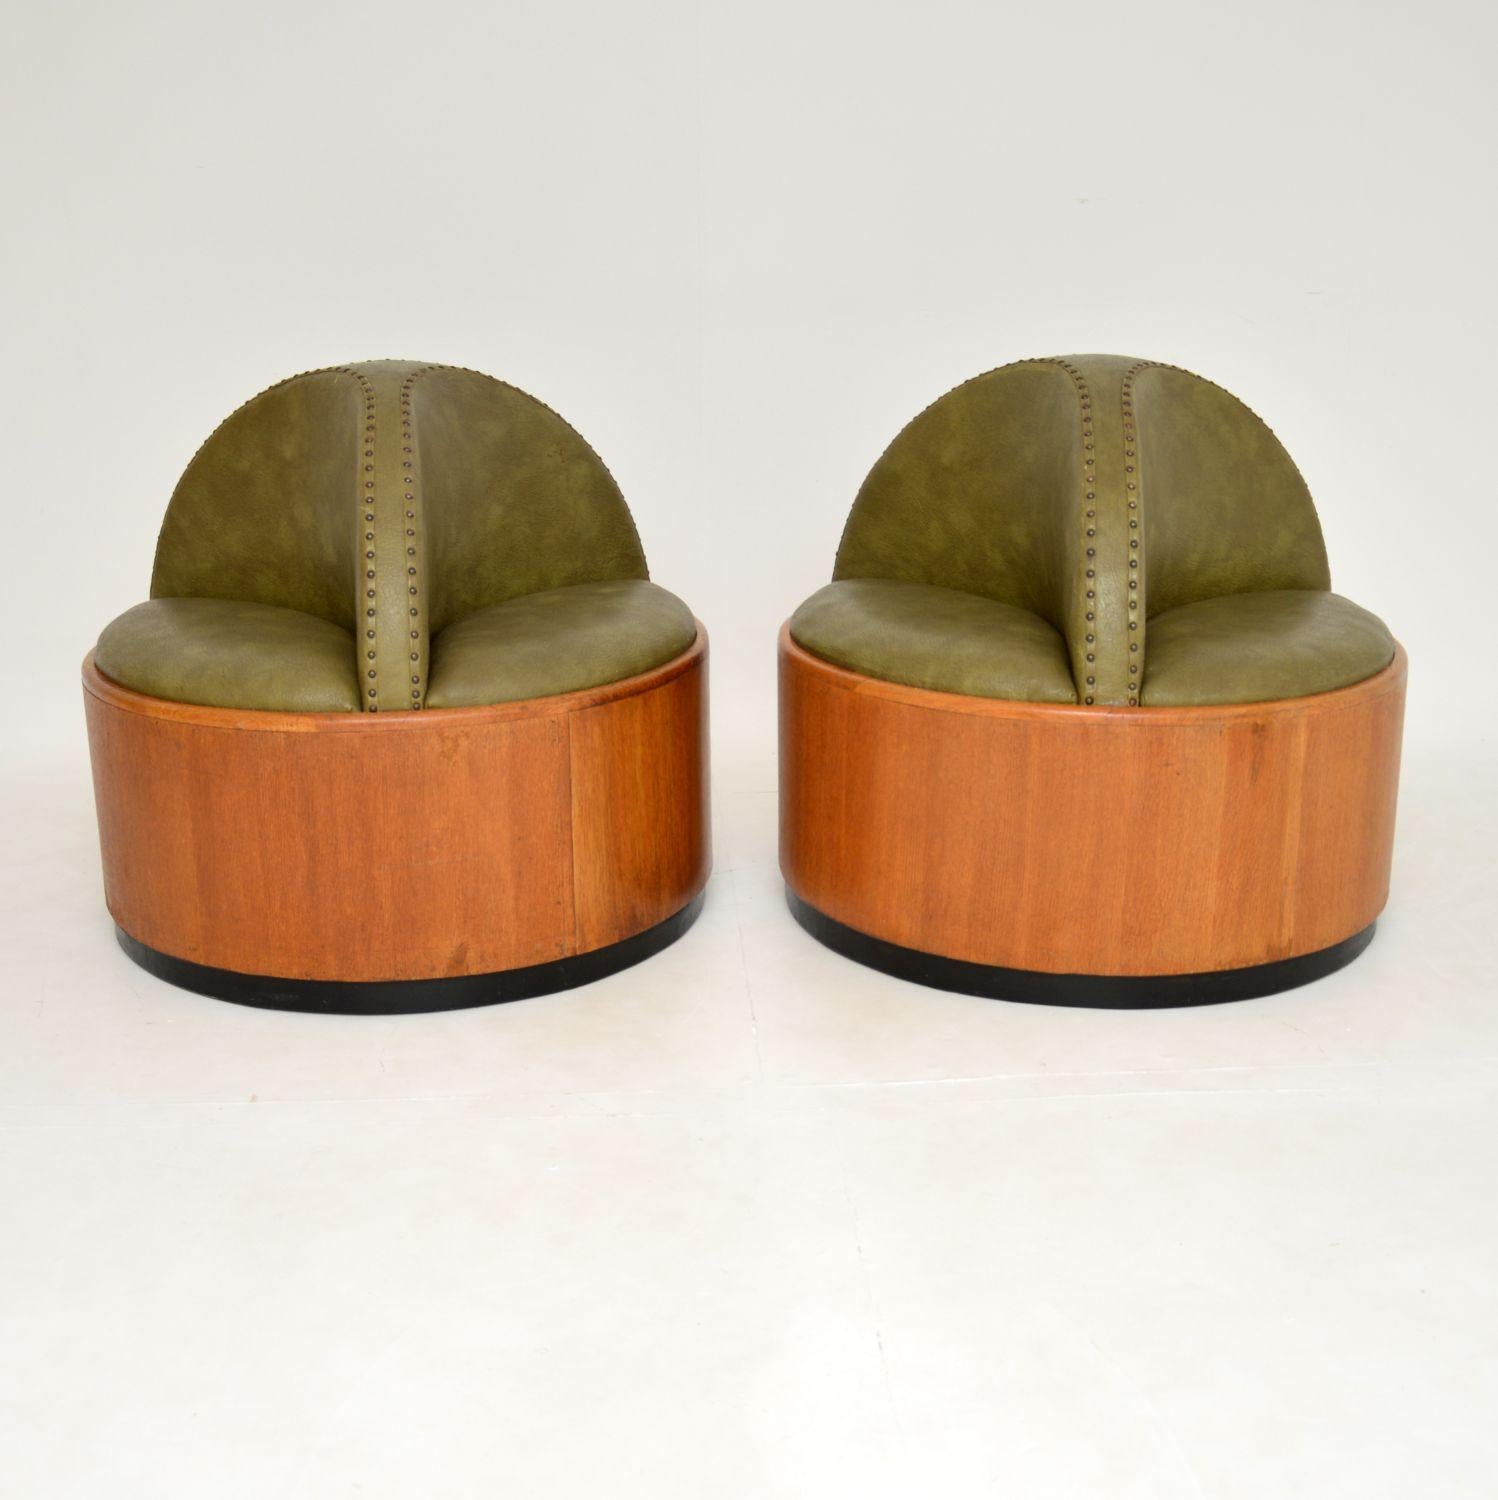 A wonderful and highly unusual pair of Art Deco period conversation seats. These were made in England, they date from the 1920-1930’s.

The design is stunning and it is extremely unusual to see three seat conversation seats from this period. The